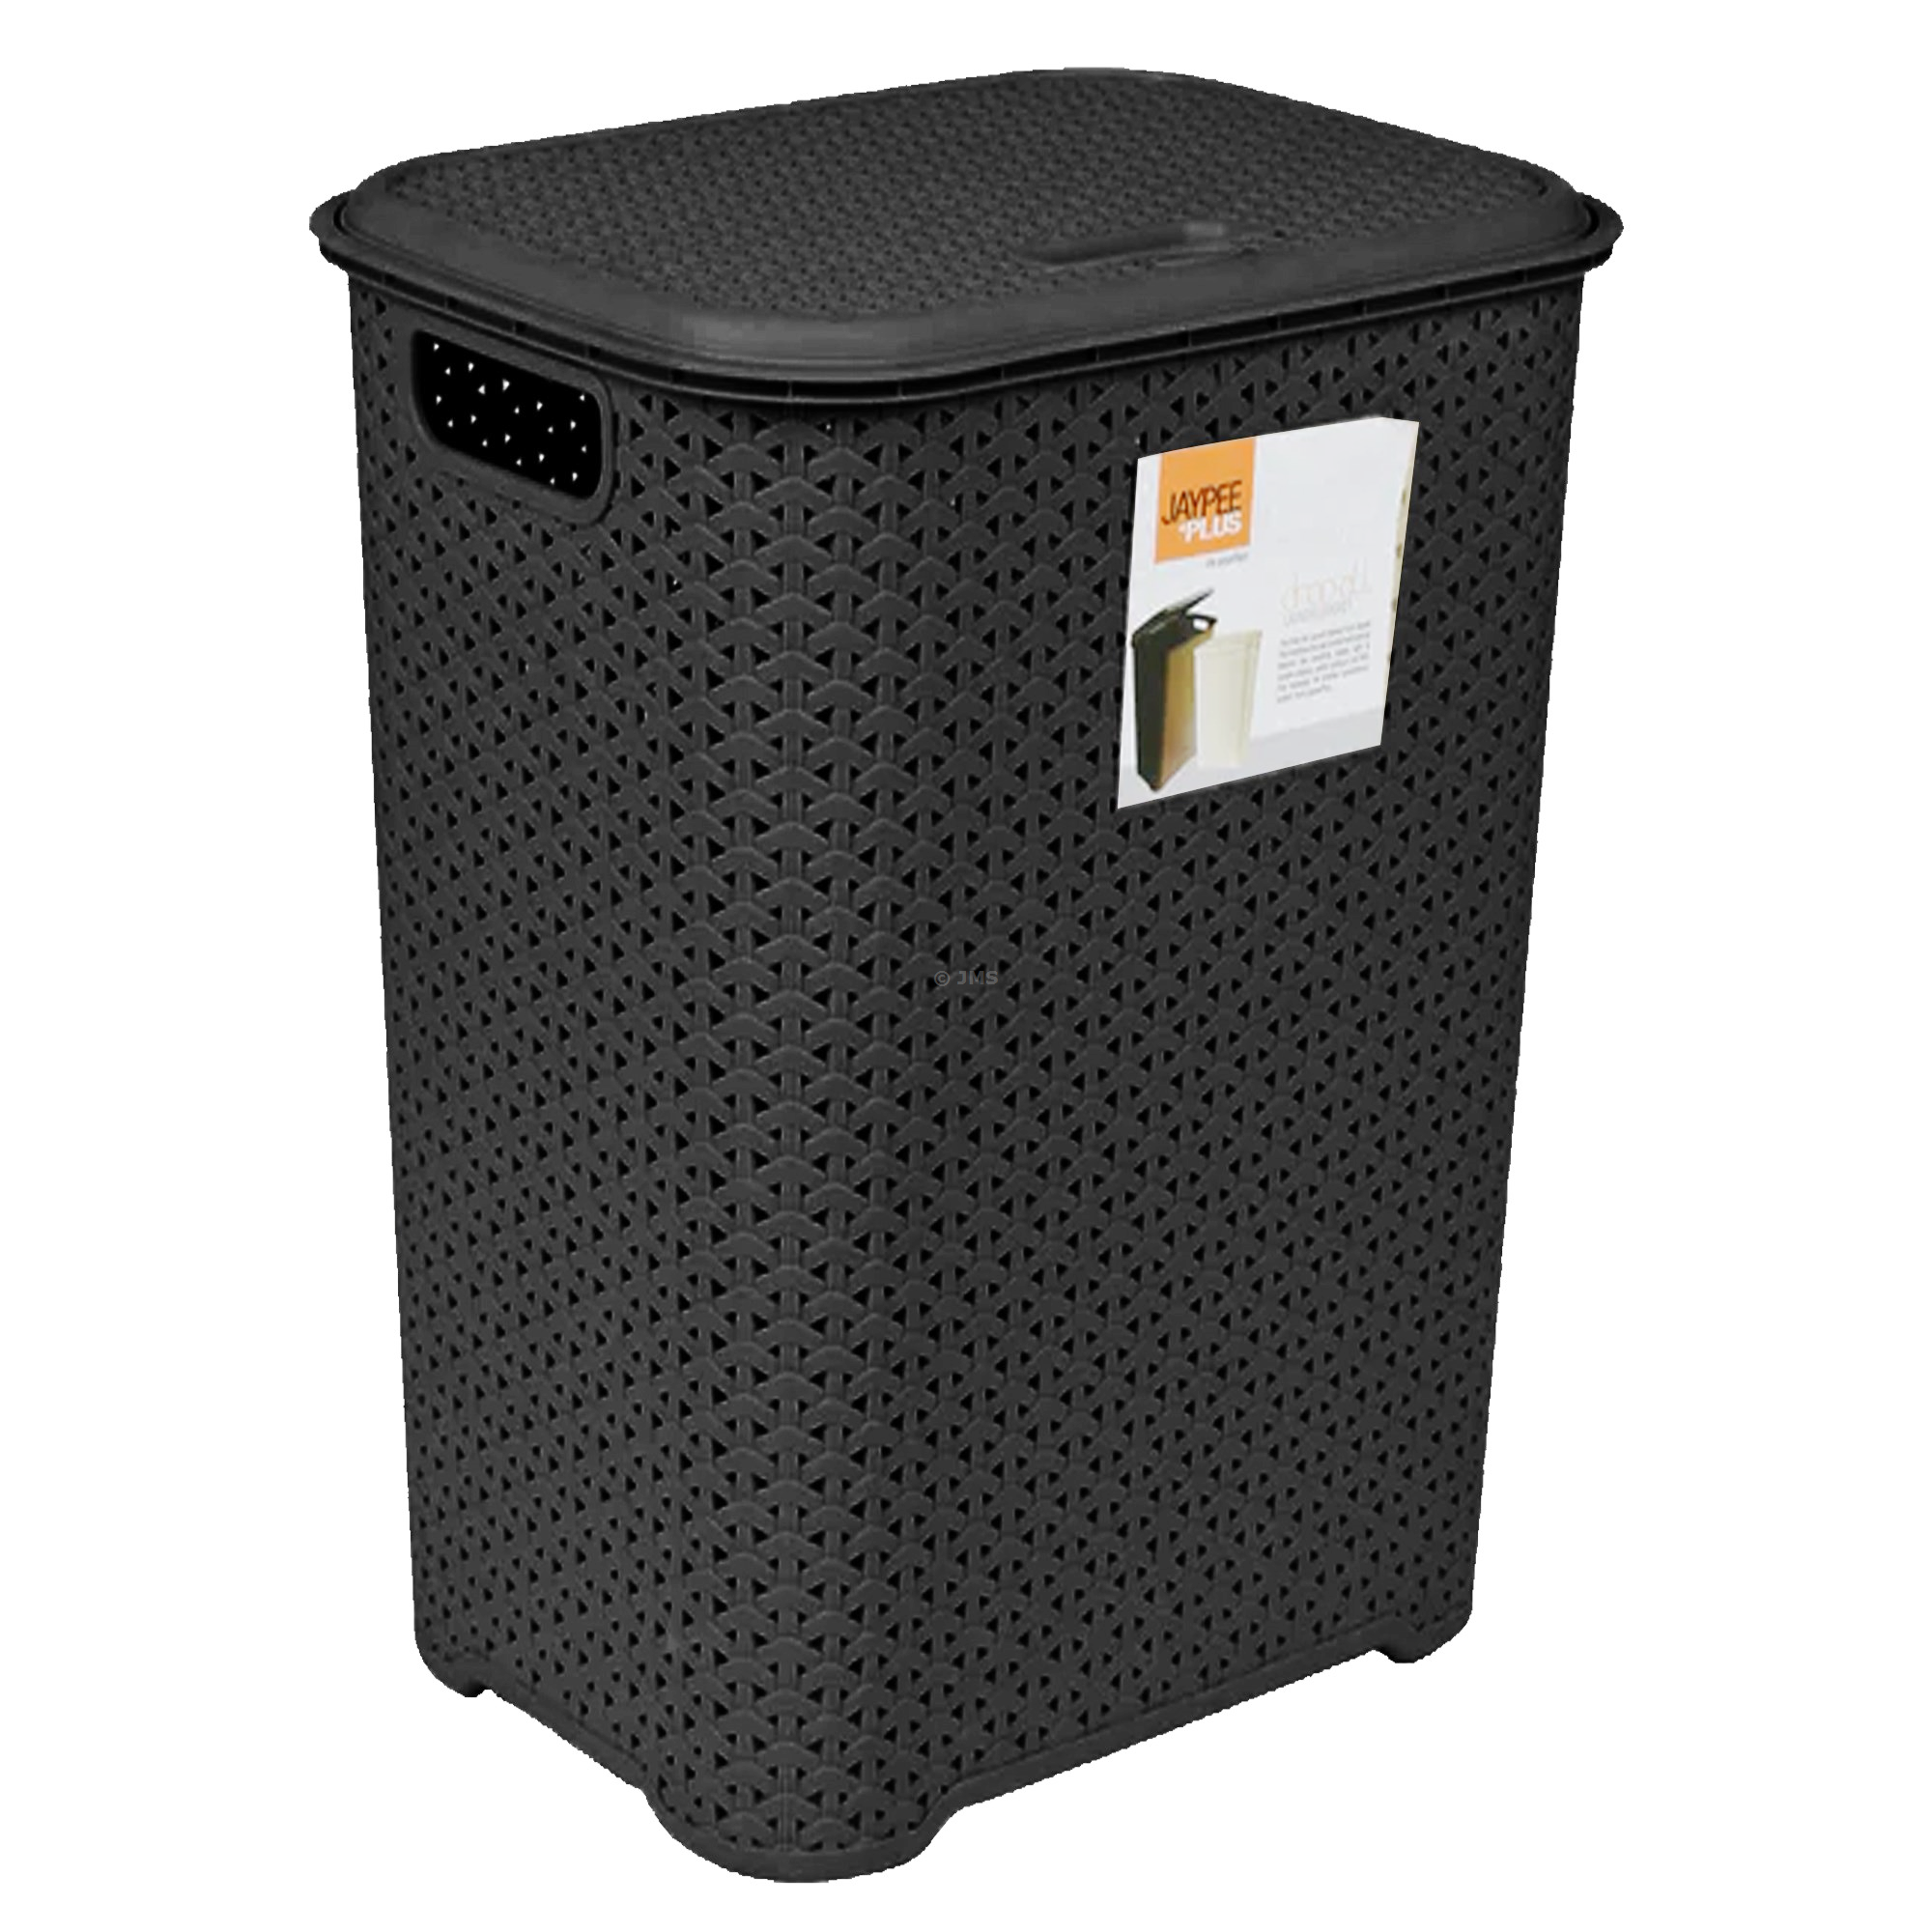 Drop All 65L Large Plastic Laundry Basket with Lid Washing Dirty Clothes Storage Linen Bin Tidy - Black